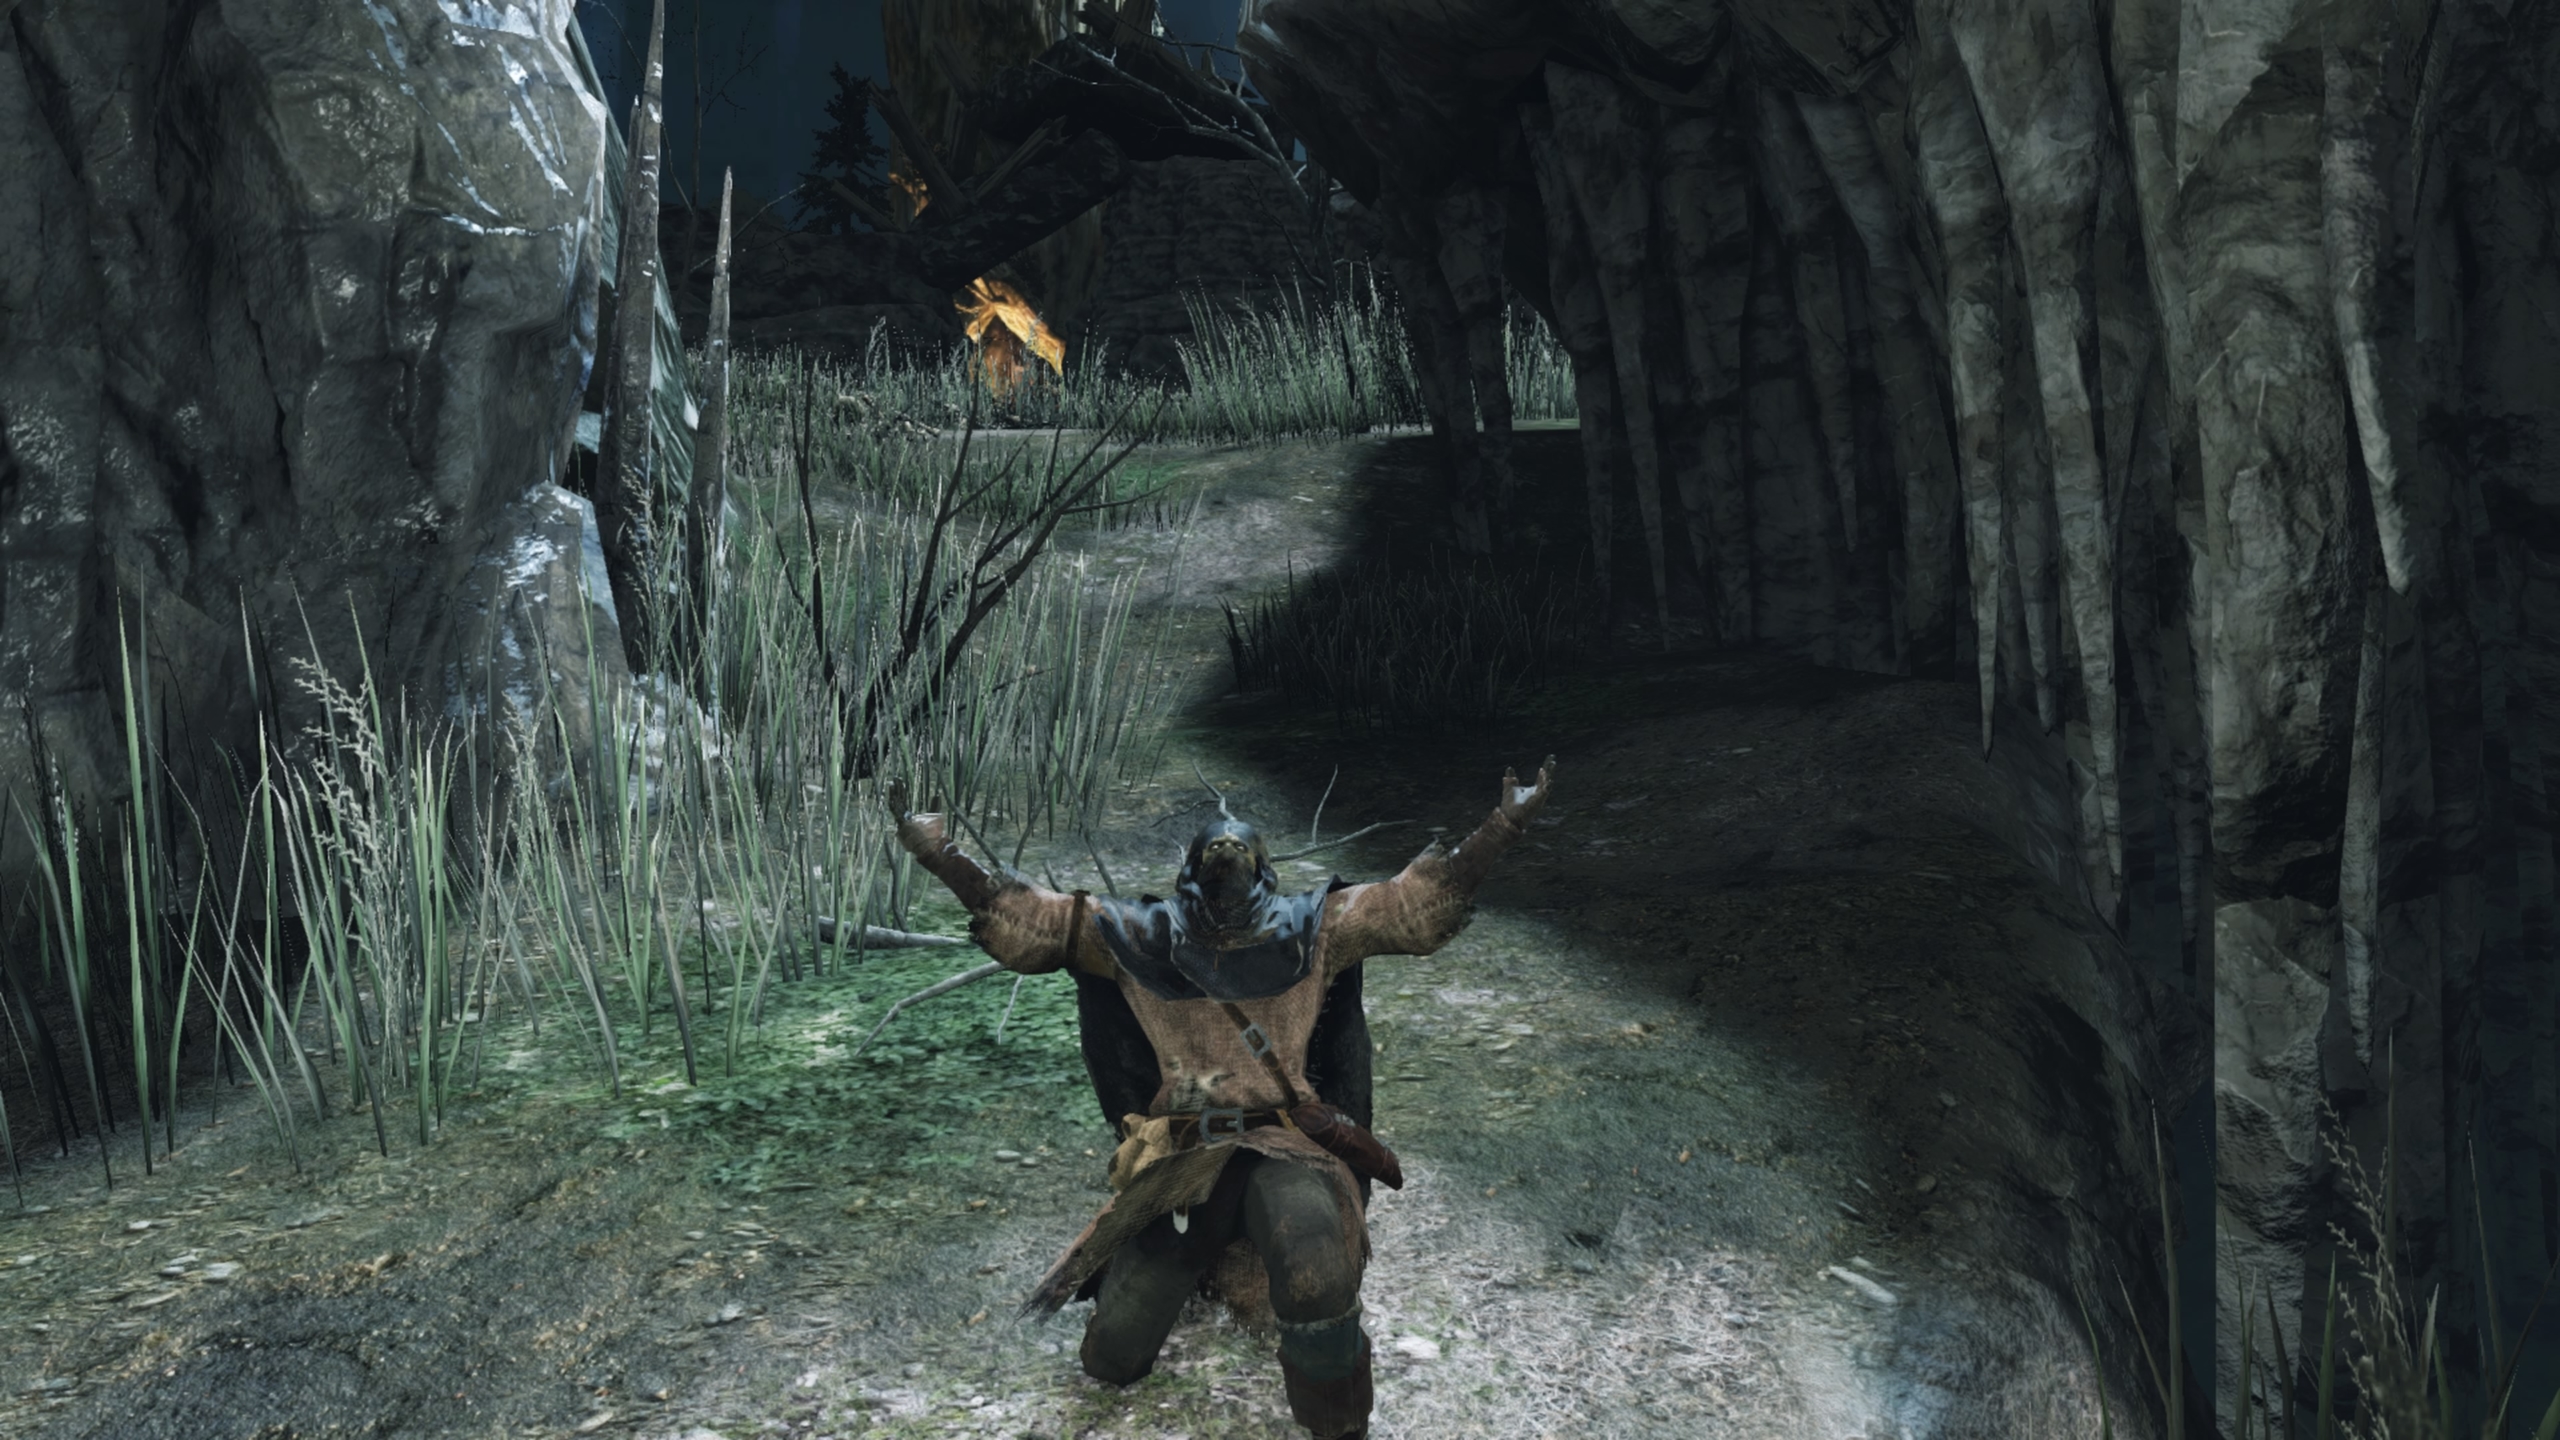 Dark Souls 2: tips for beginners and returning masochists - Polygon